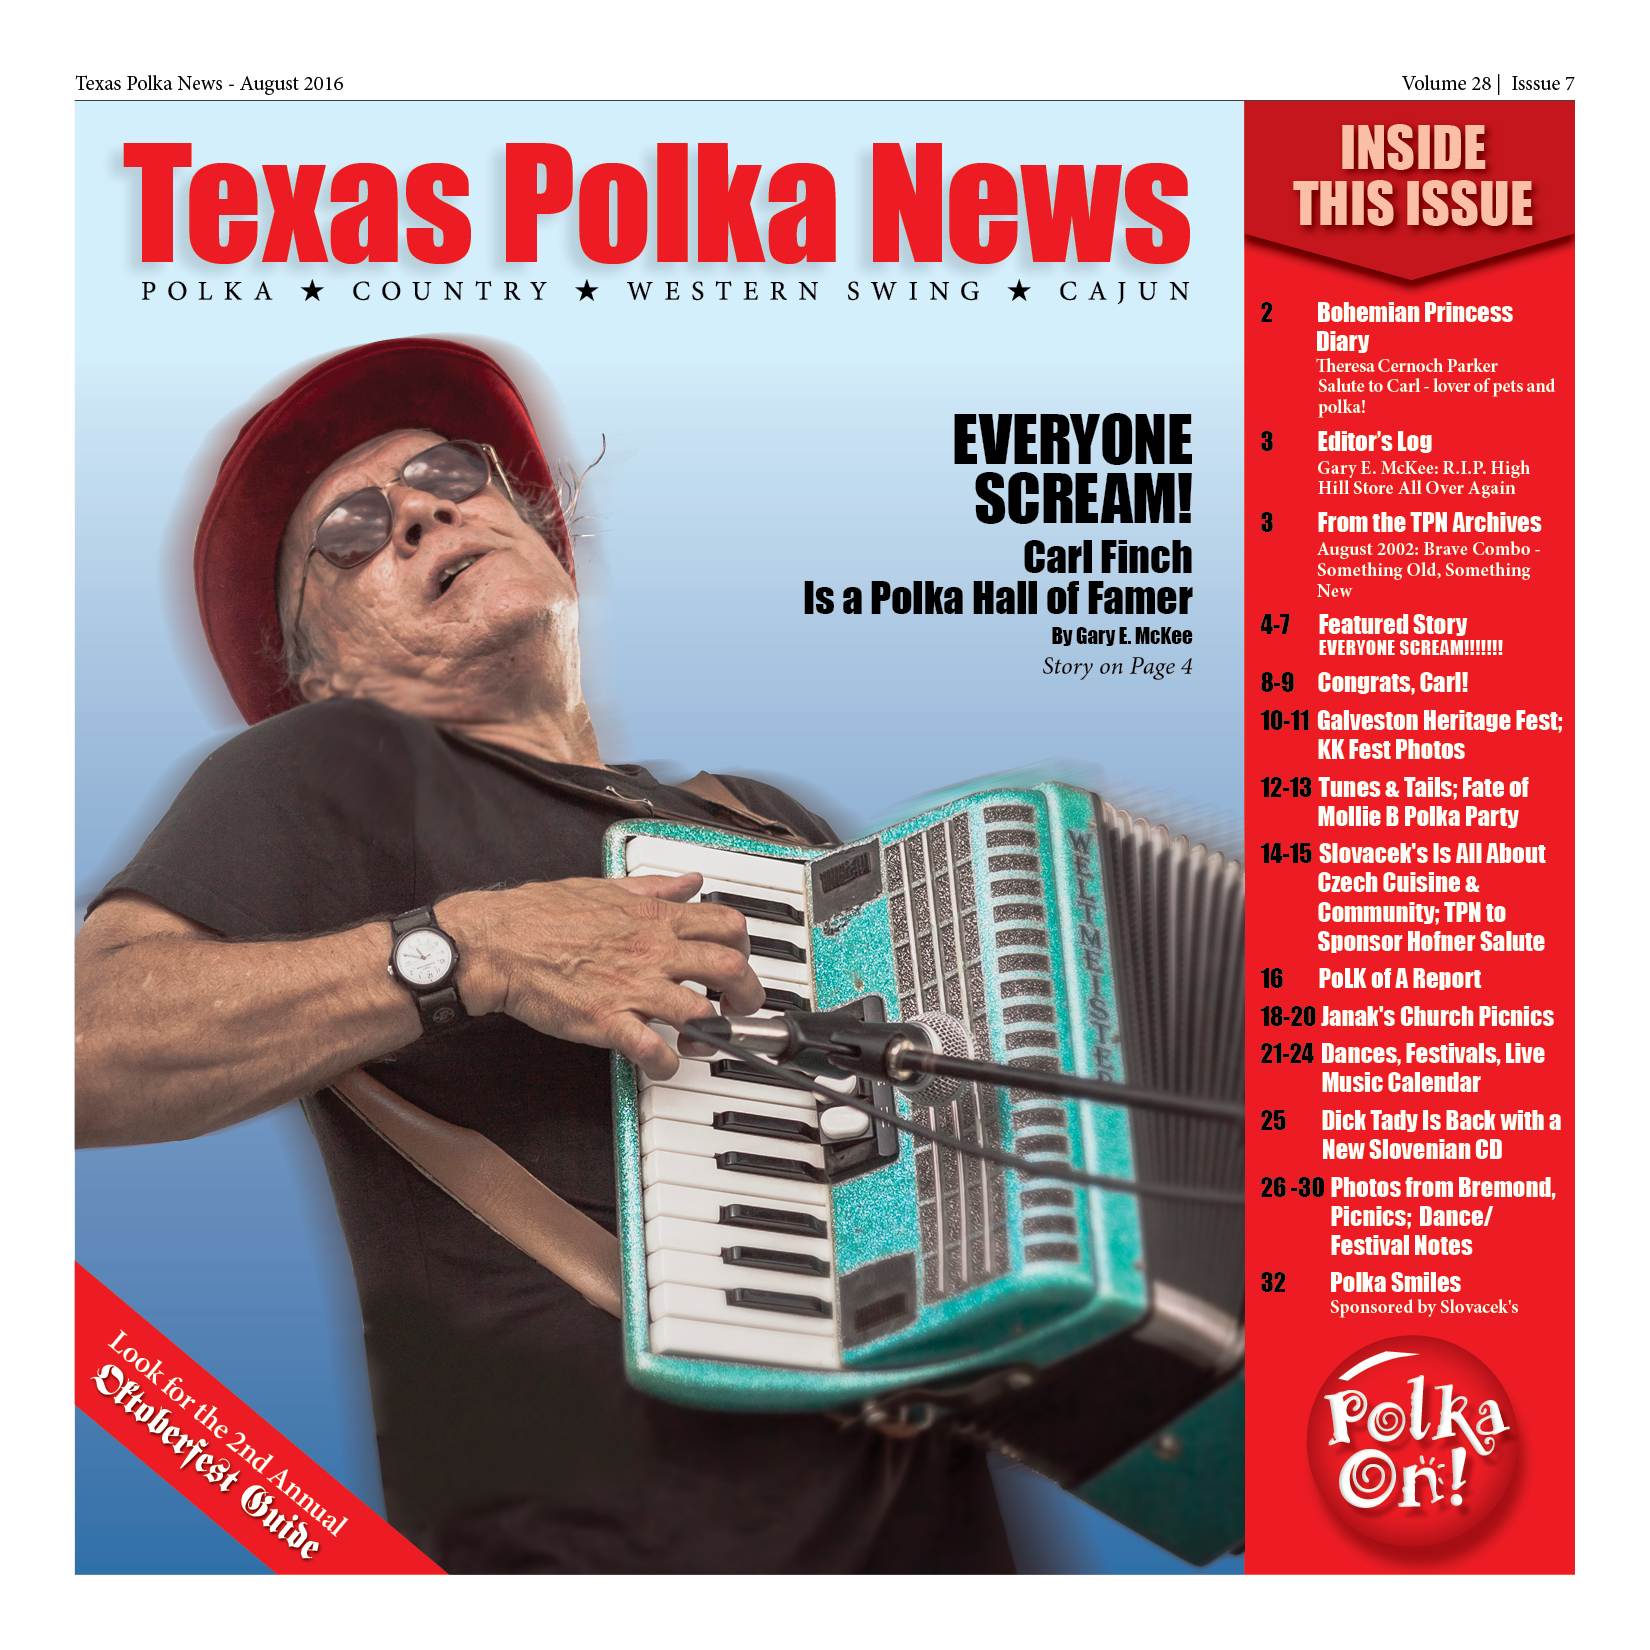  Gary E. McKee's article appears in the August issue of Texas Polka News. 